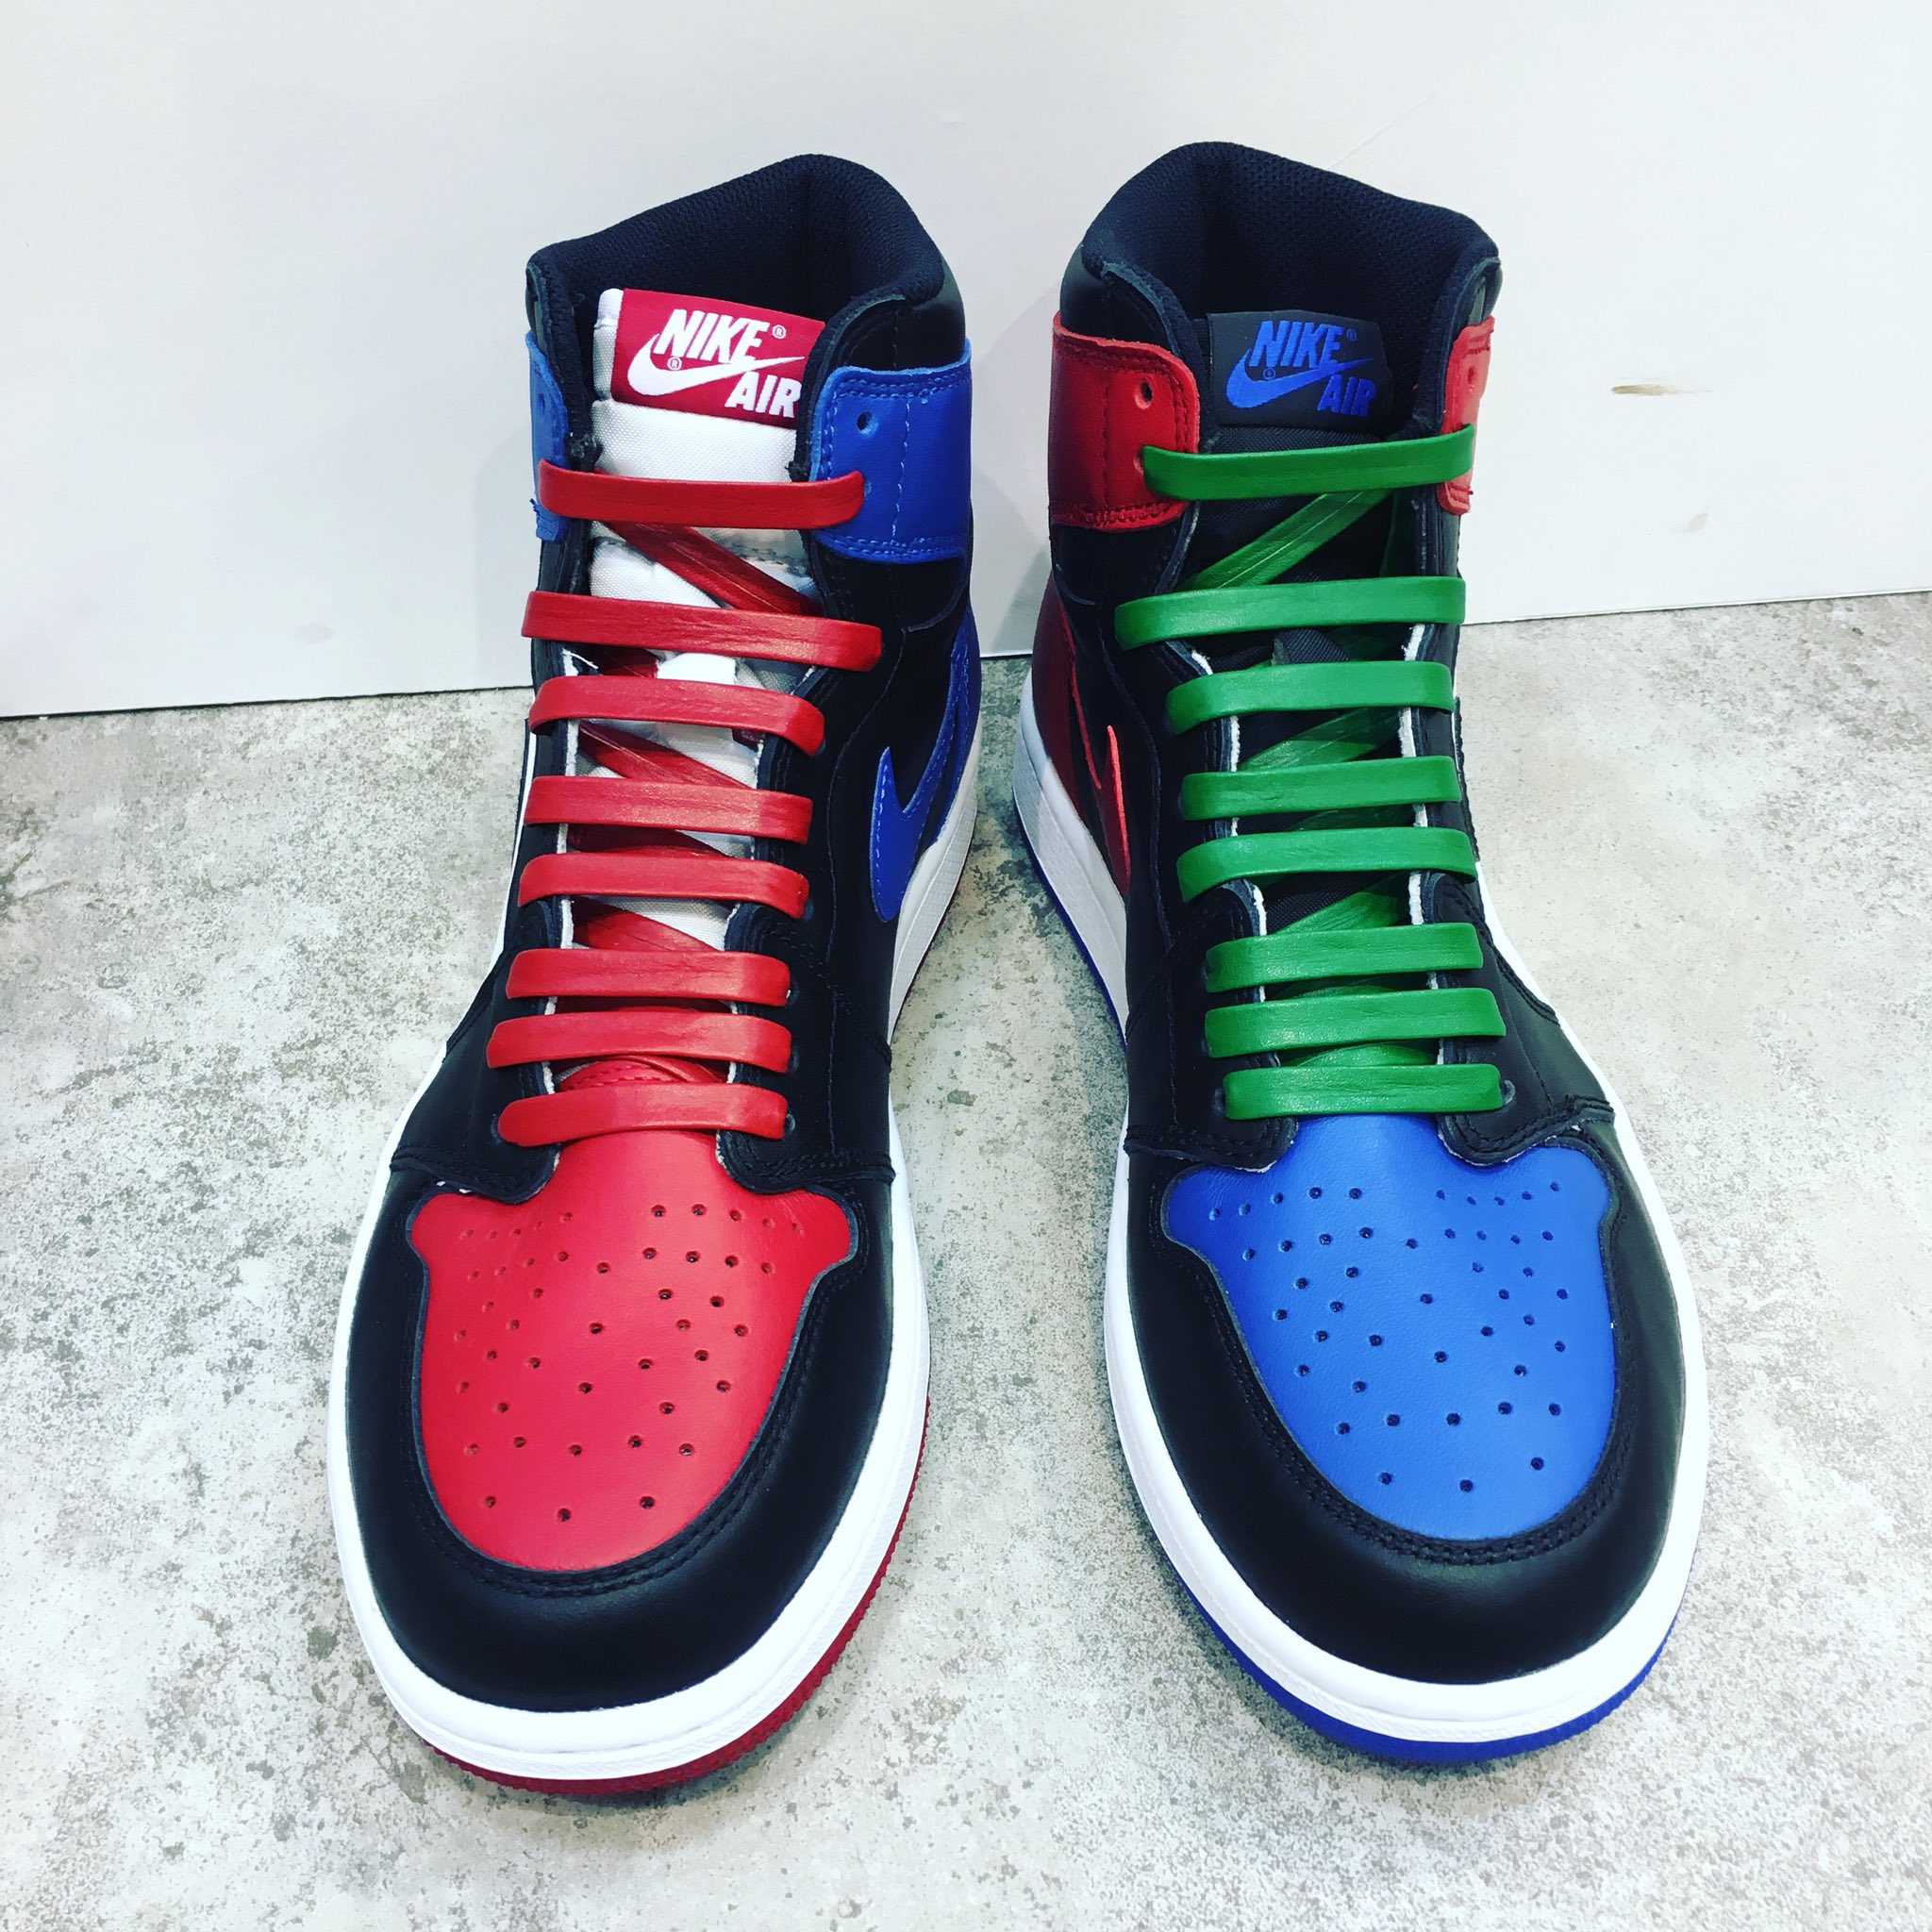 wef on Twitter: "Nike Air Jordan 1 Retro High OG Top 3 Pickと#wef ♡ #shoes  #shoelaces #sneakers #leather #leathershoelaces #tokyo #nike #airjordan1  #top3pick #chicago #bredbanned #royal #ウェフ #スニーカー #靴 #靴紐 #レザー  #makeyourchoice